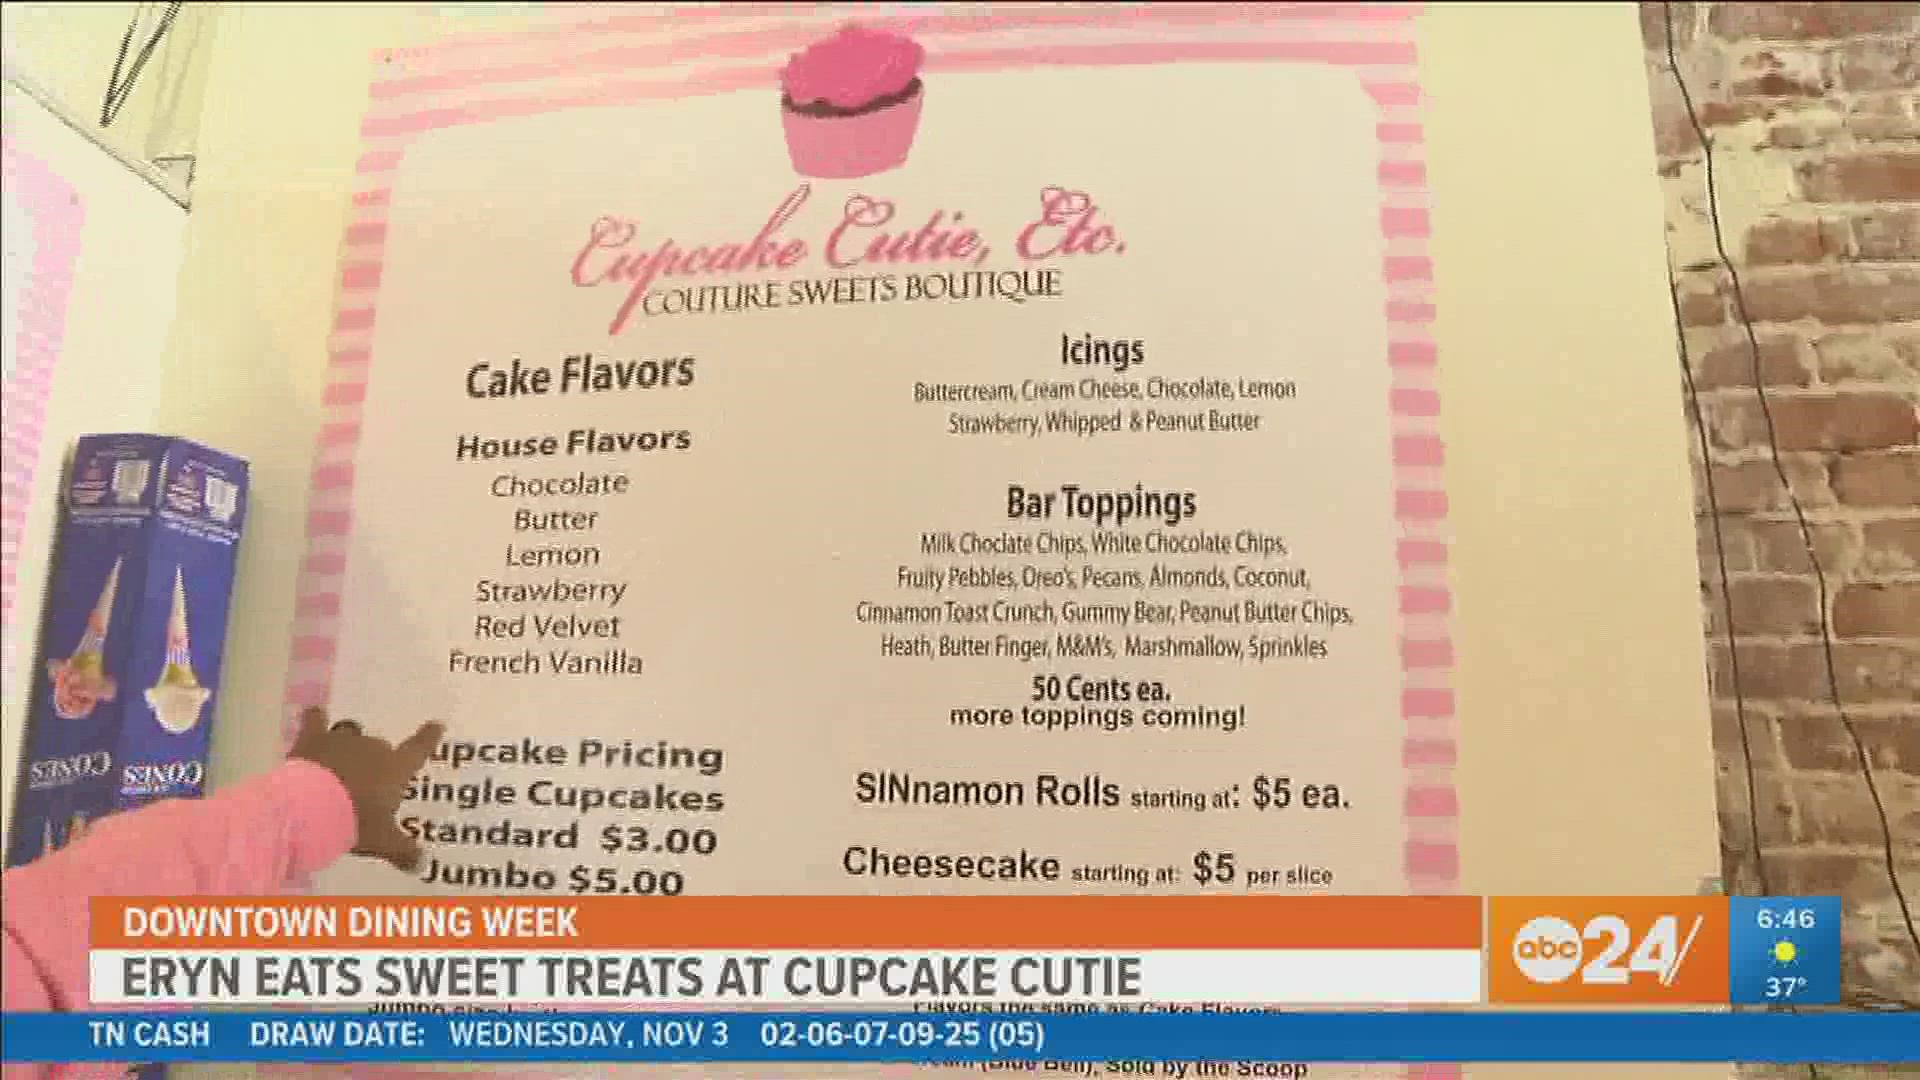 Anchor Eryn Rogers explores Memphis' Downtown Dining Week by giving a jolt to her sweet tooth at Cupcake Cutie where the owners specialize in personalized cupcakes.